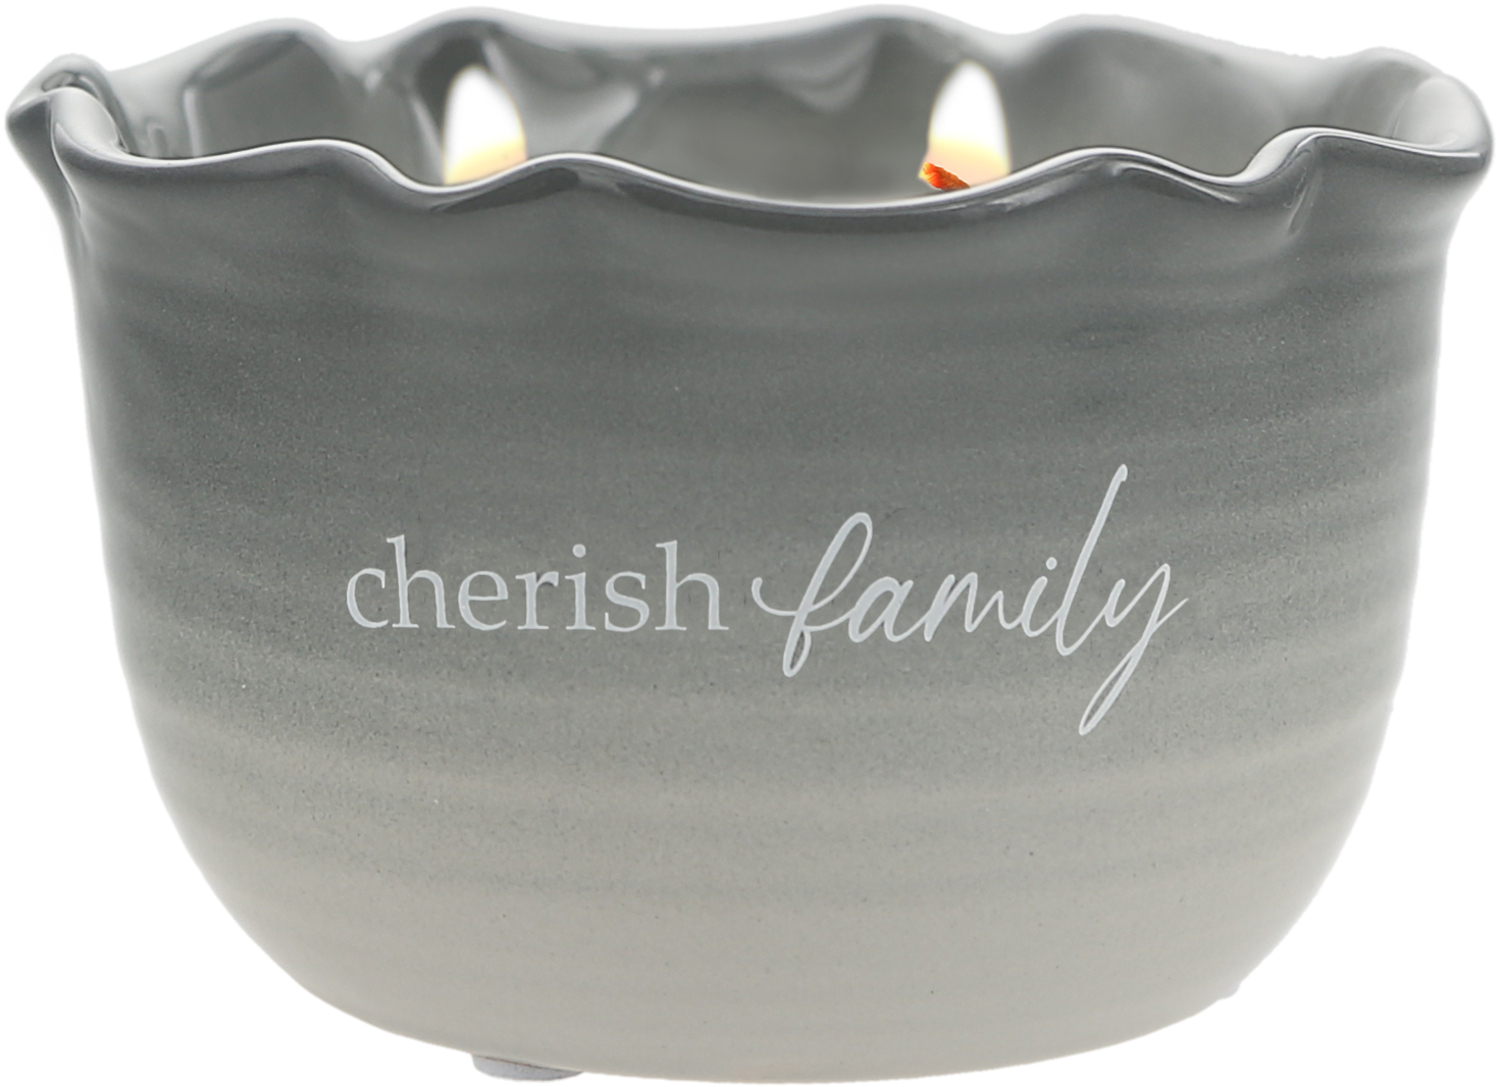 Cherish Family by Thoughts of Home - Cherish Family - 11 oz - 100% Soy Wax Reveal Candle
Scent: Tranquility